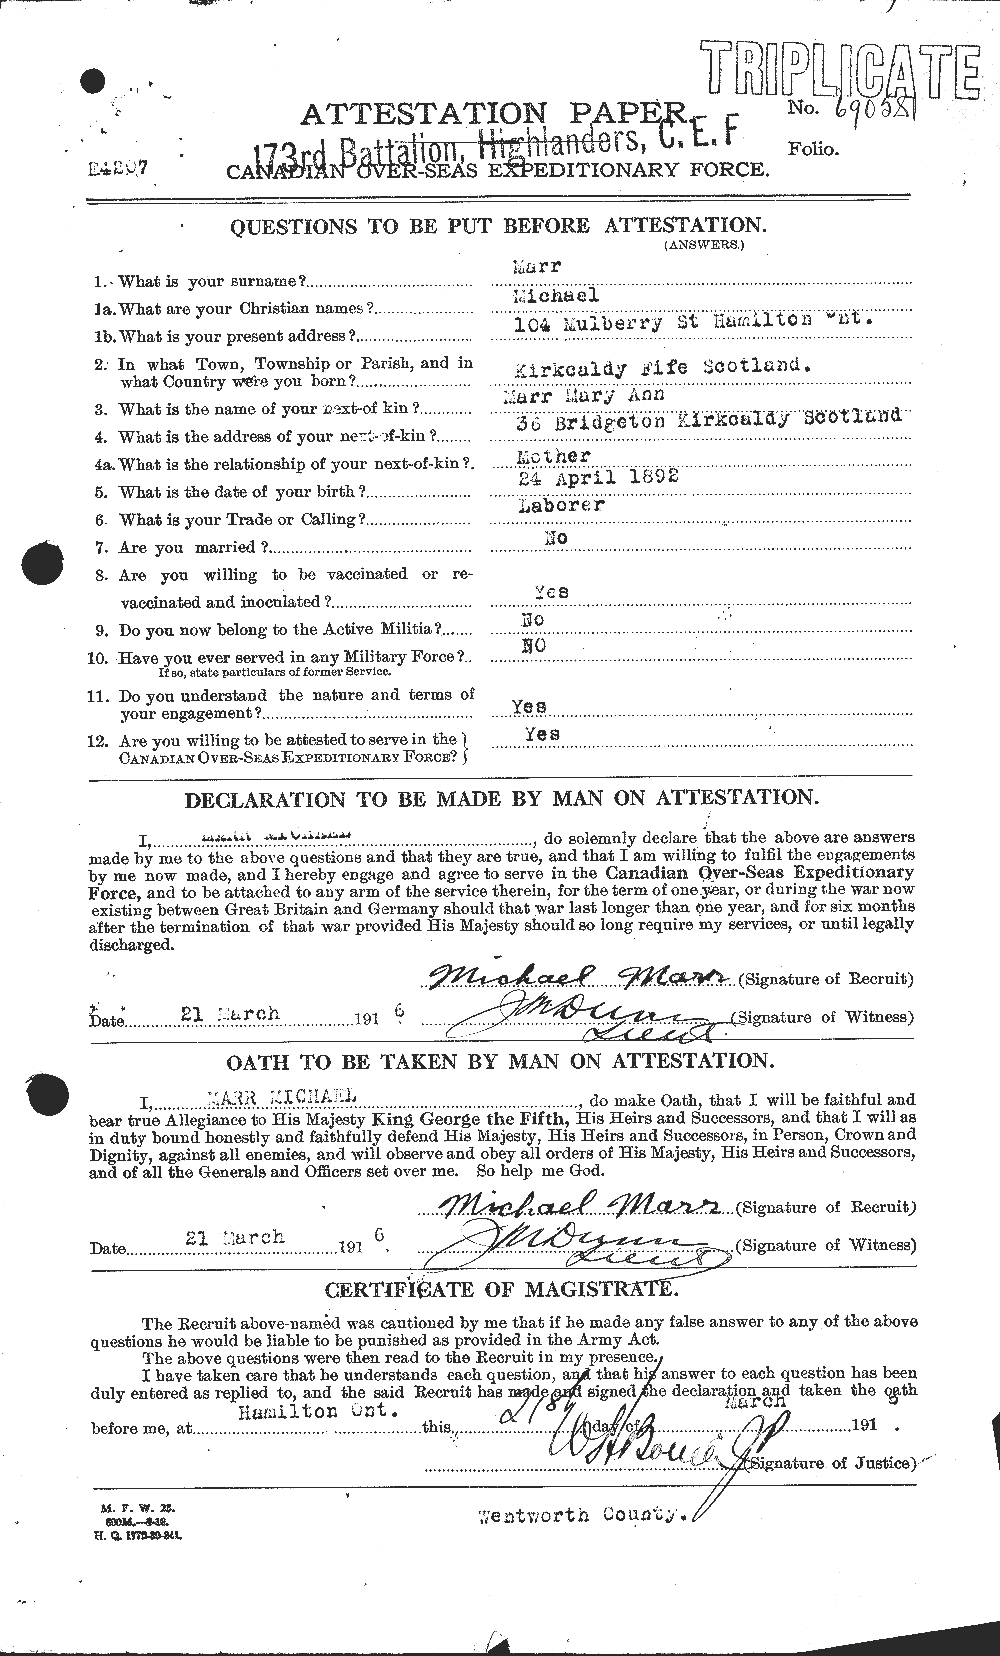 Personnel Records of the First World War - CEF 485667a